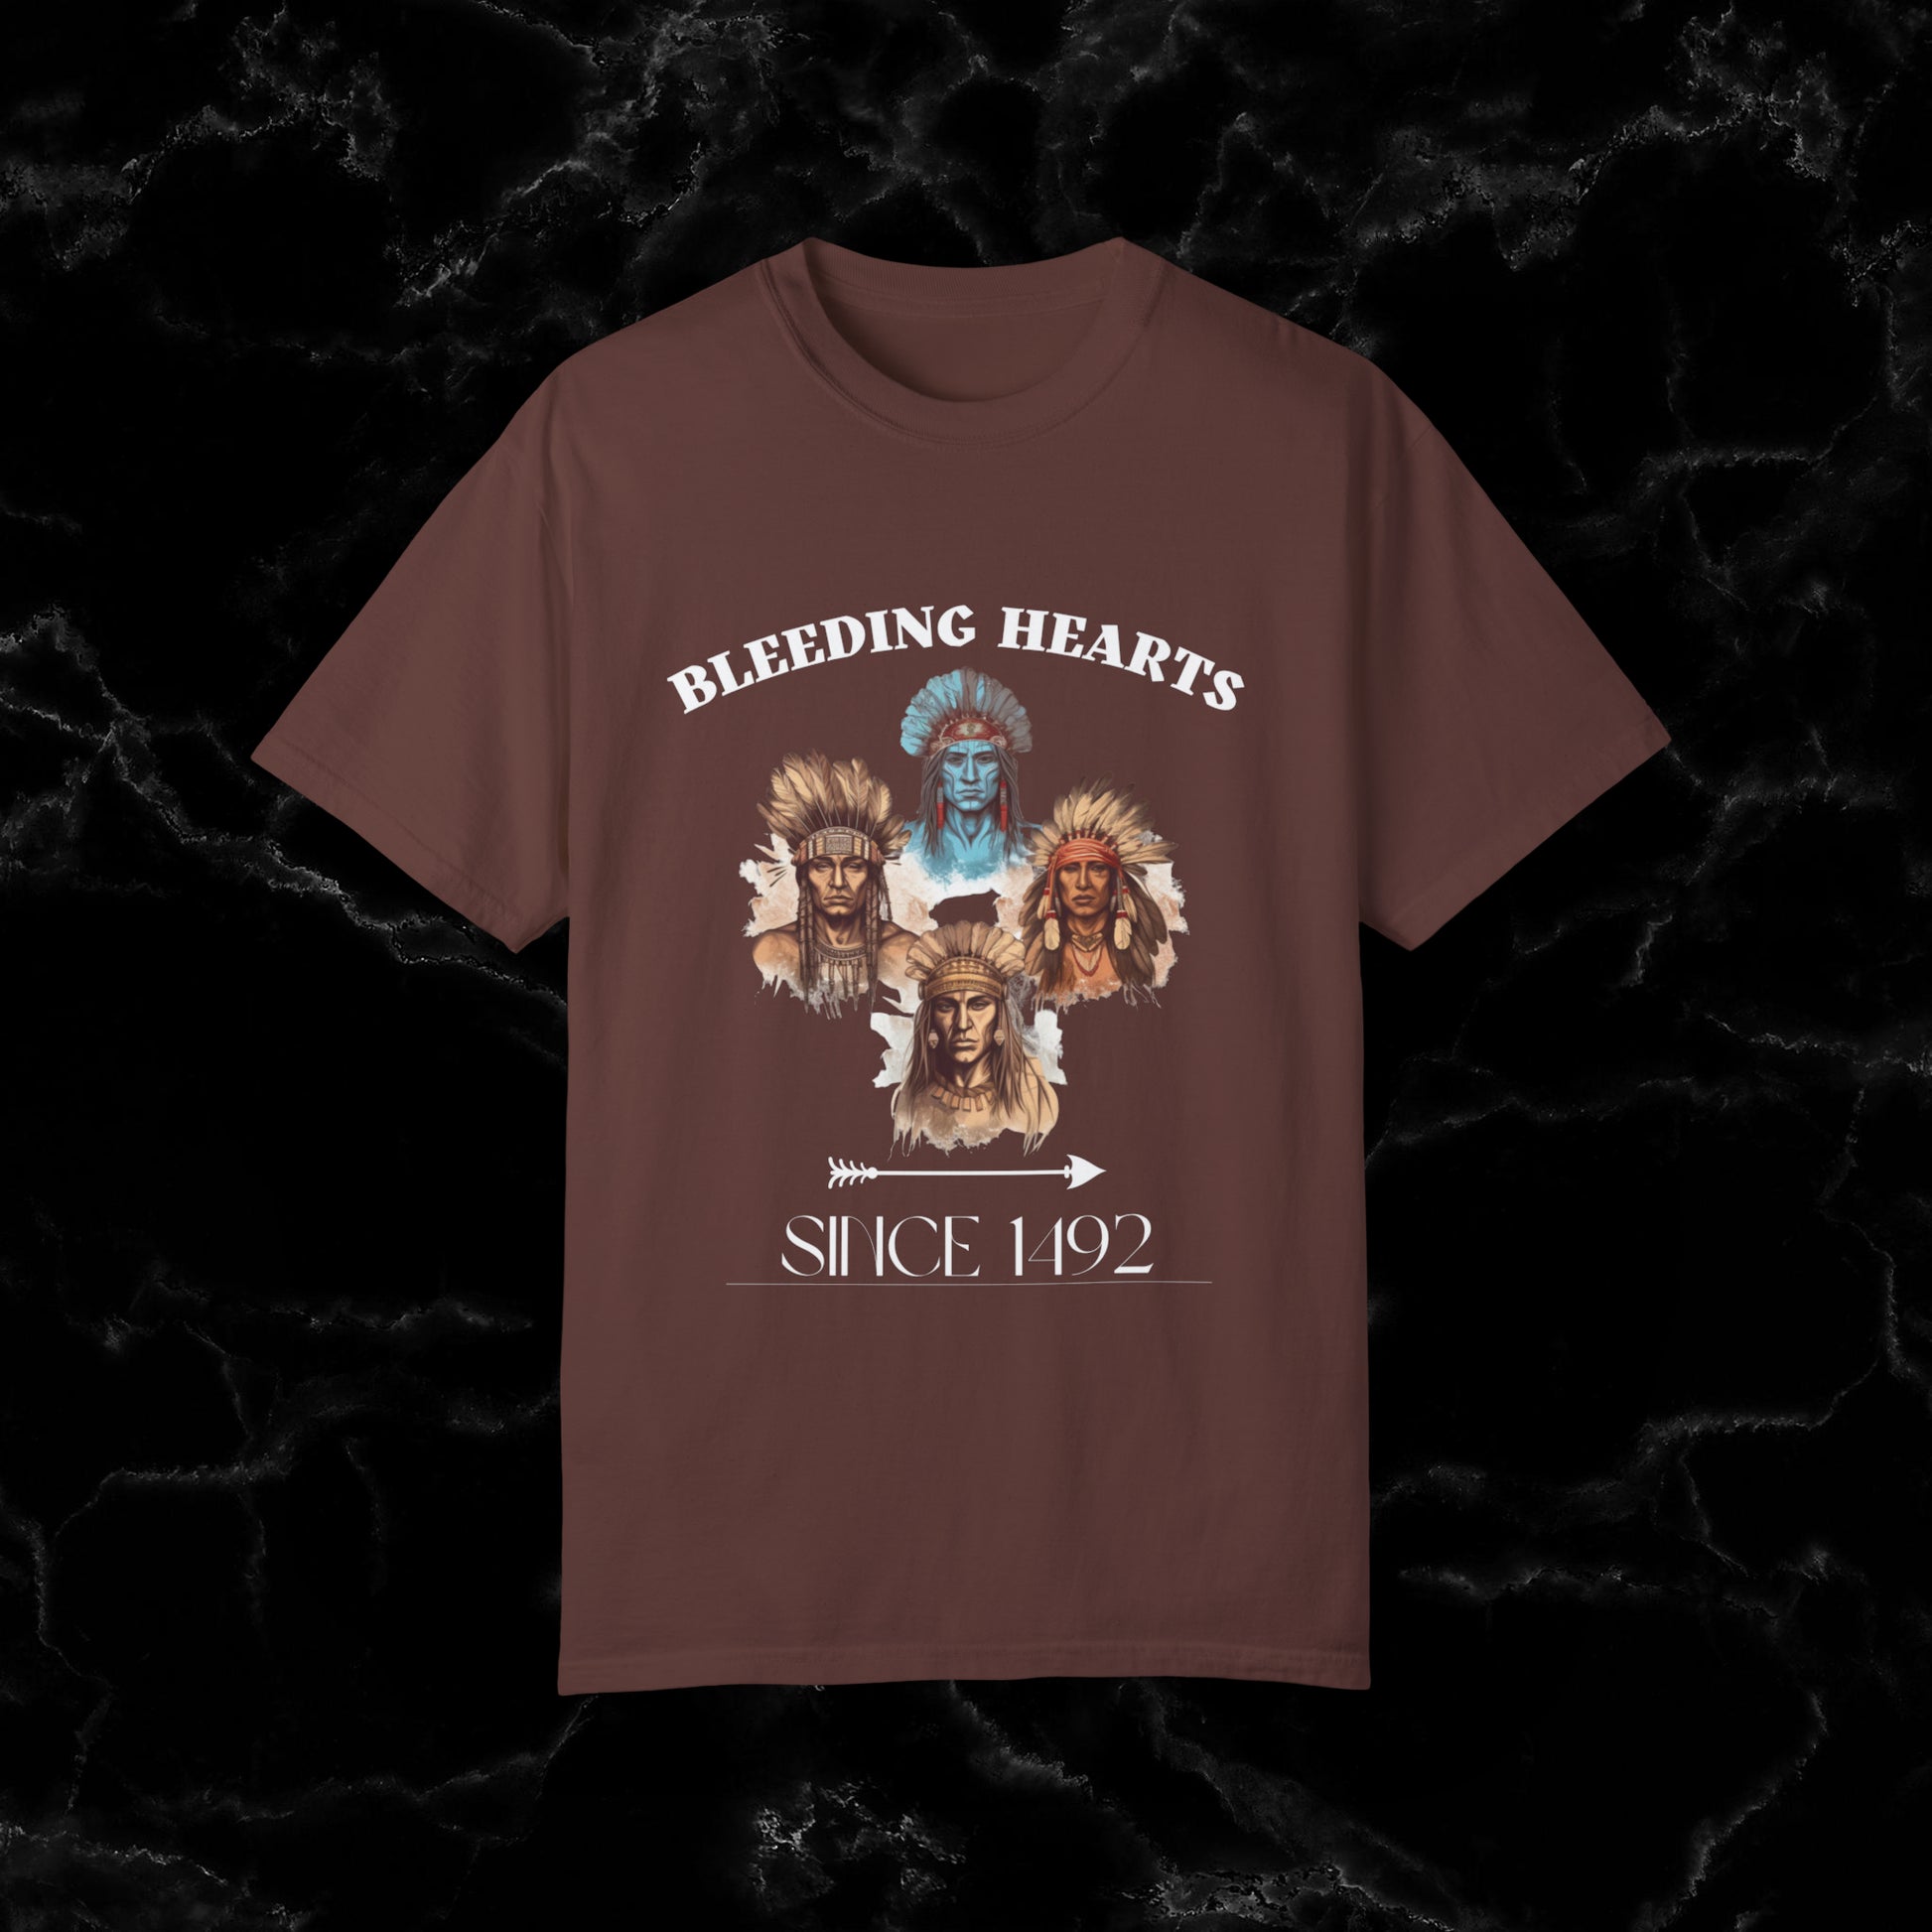 Native American Comfort Colors Shirt - Authentic Tribal Design, Nature-Inspired Apparel, 'Bleeding Hearts since 1492 T-Shirt Vineyard S 